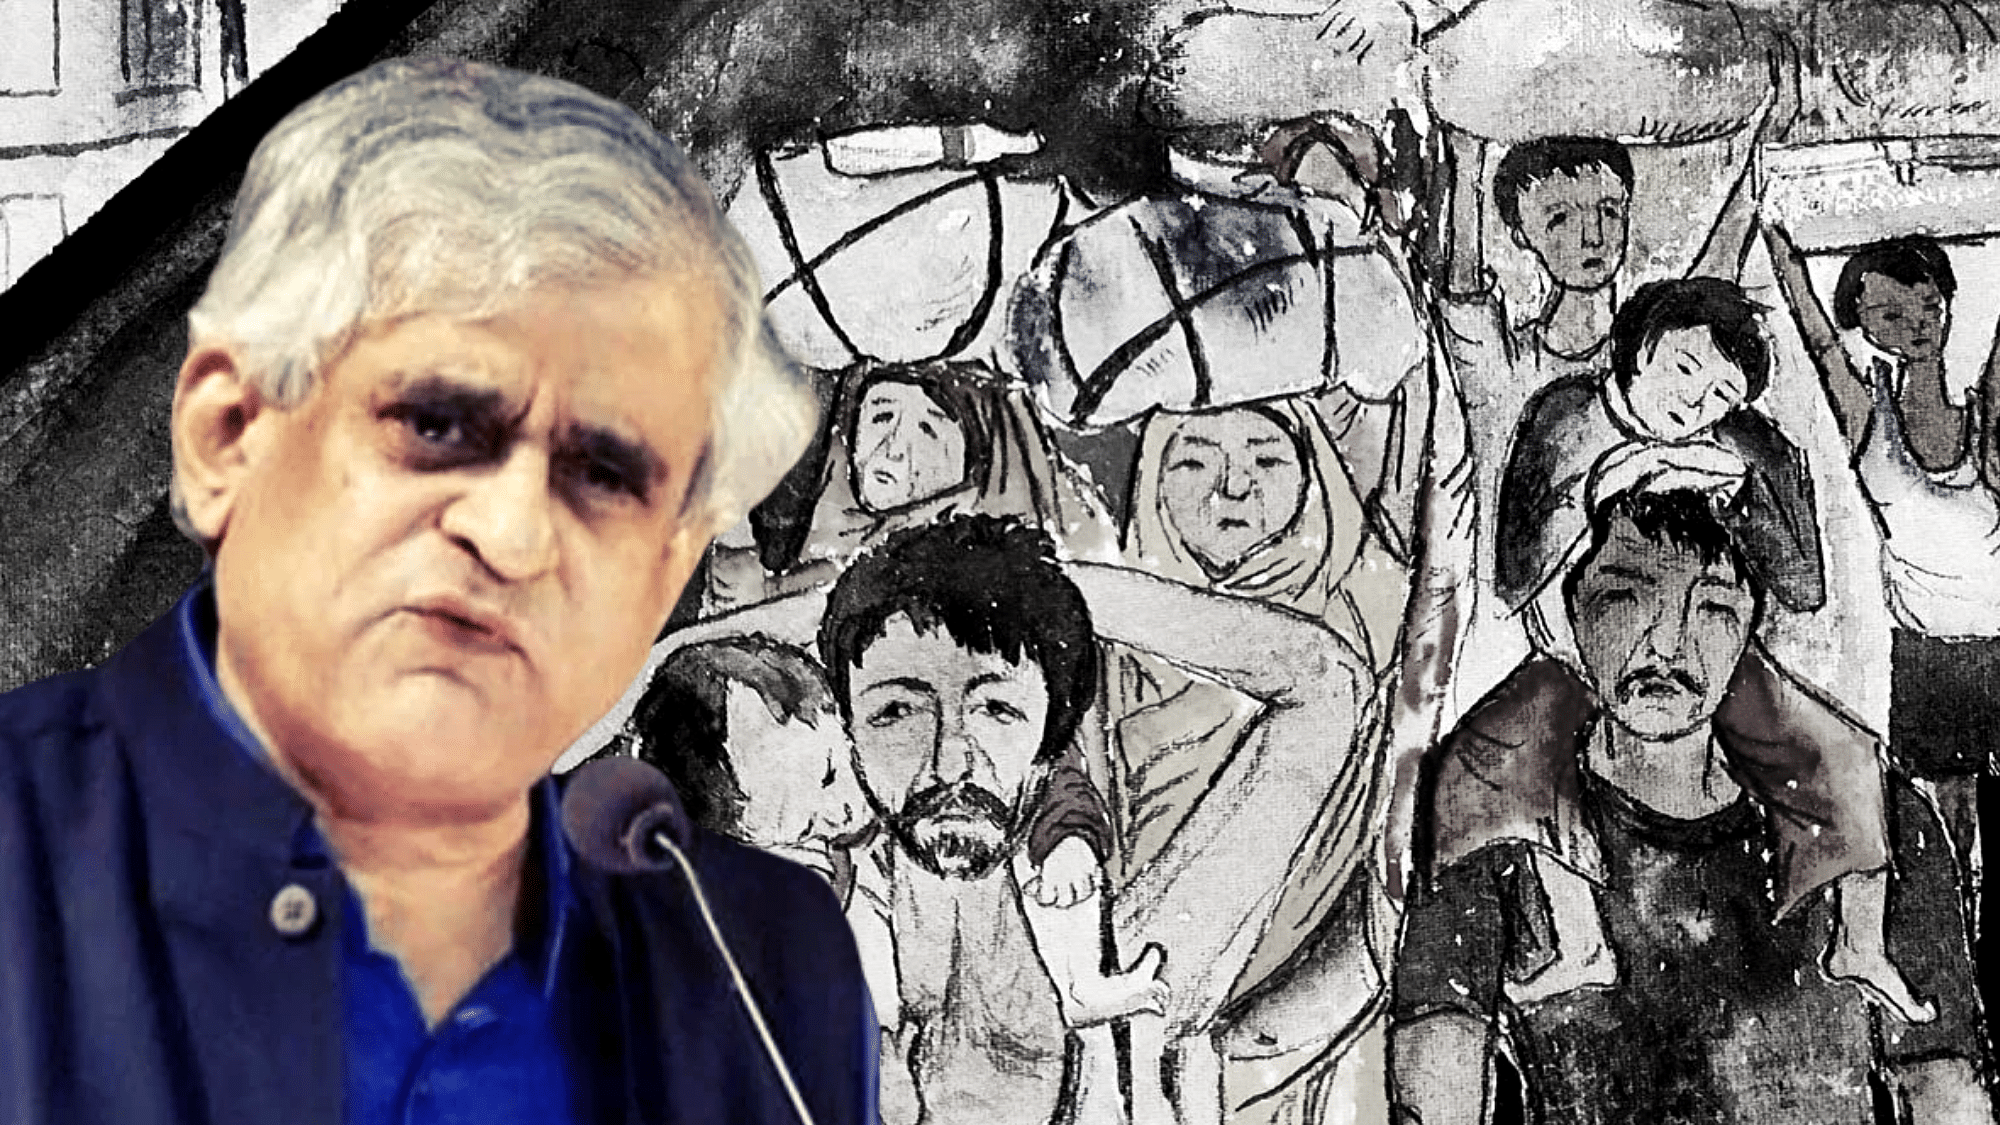 P Sainath lists his suggestions on the steps India should take to counter the fallout of the coronavirus crisis.